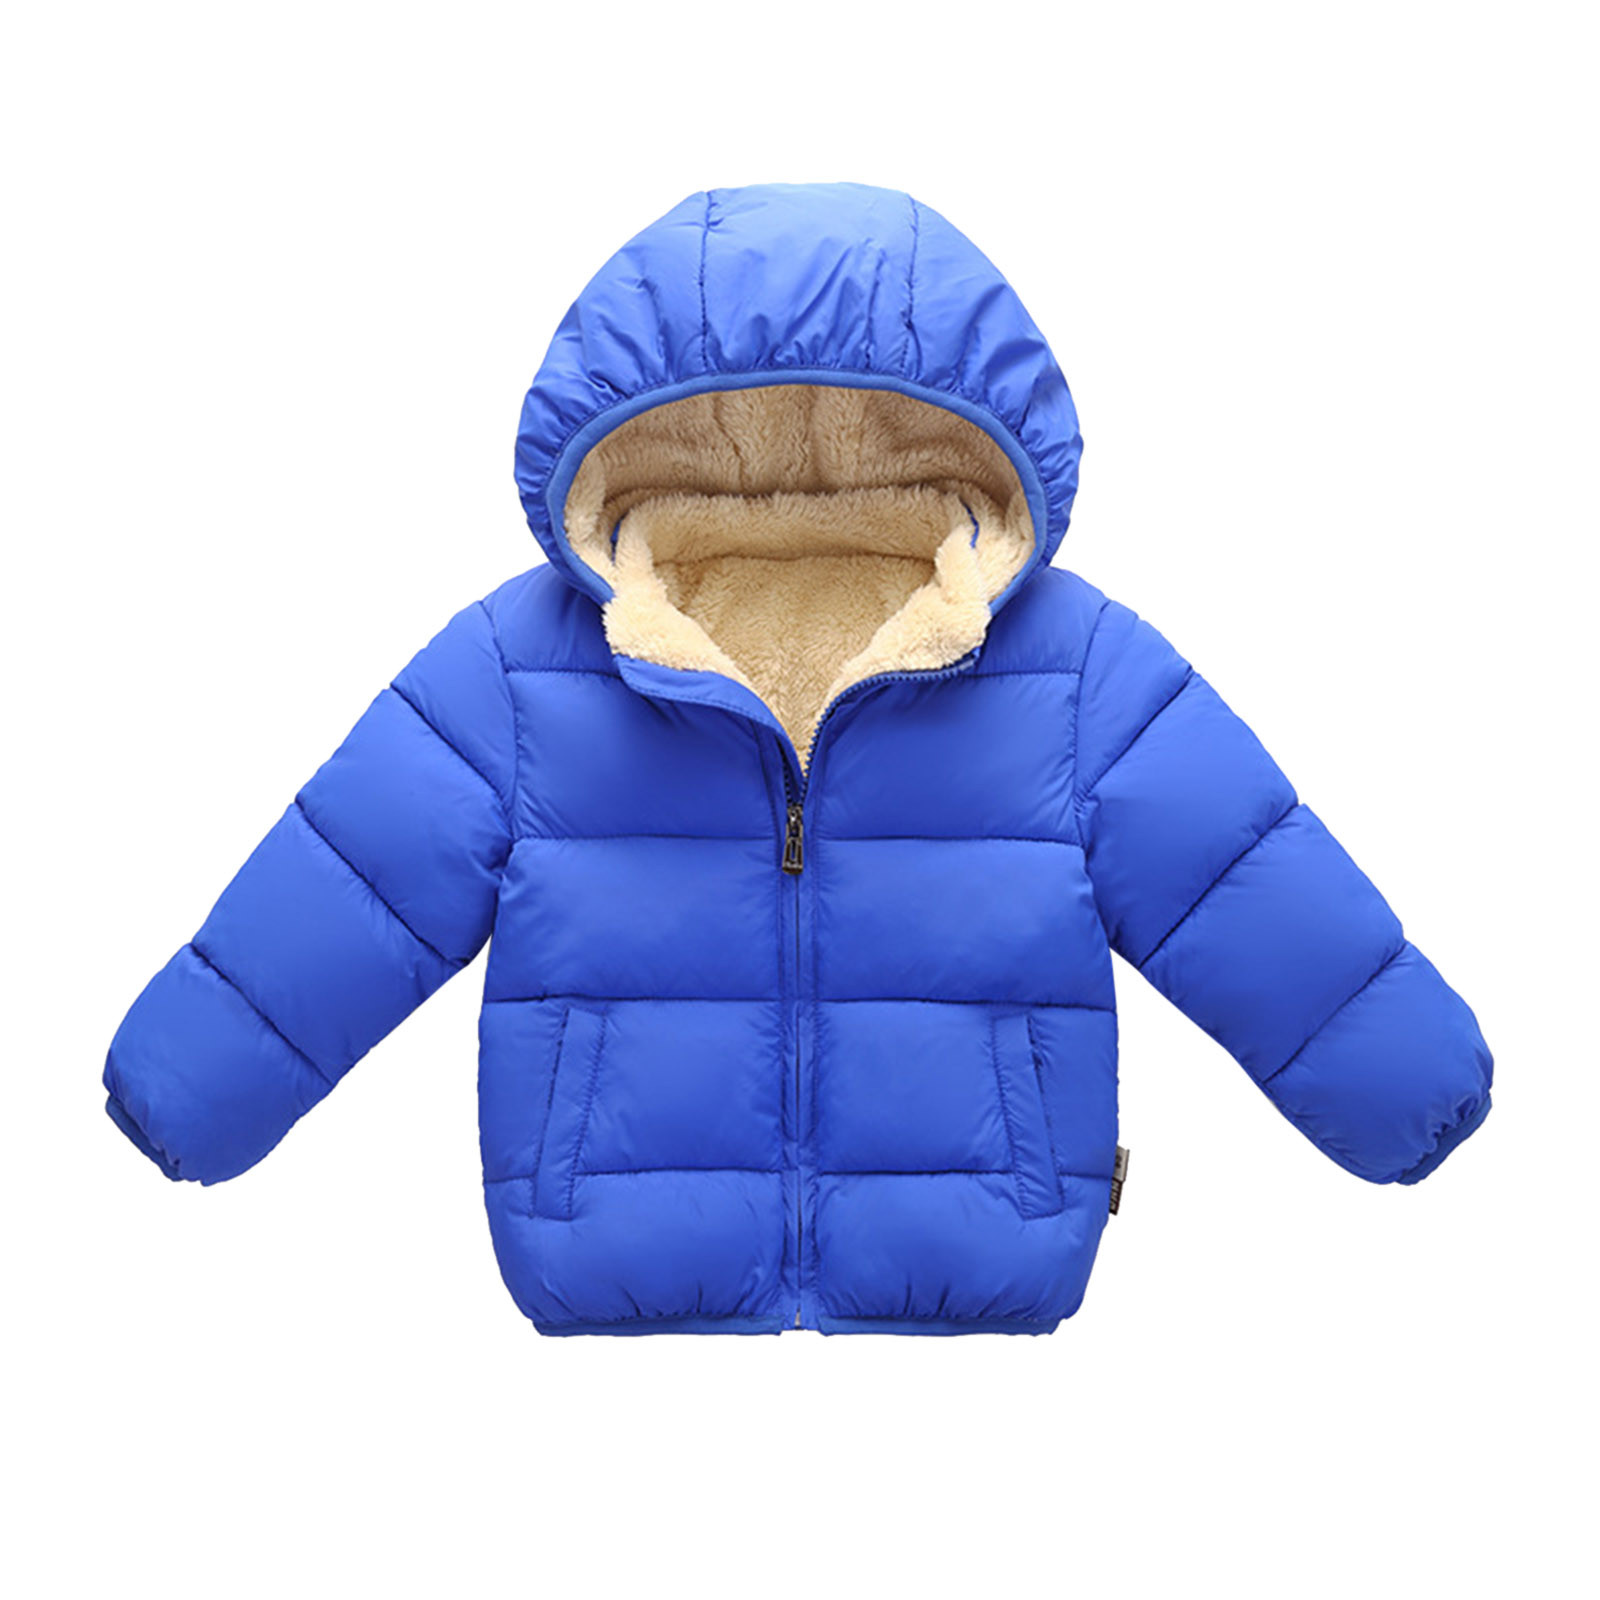 Kids Child Toddler Baby Boys Girls Solid Winter Hooded Coat Jacket Thick Warm Outerwear Clothes Outfits - image 1 of 5